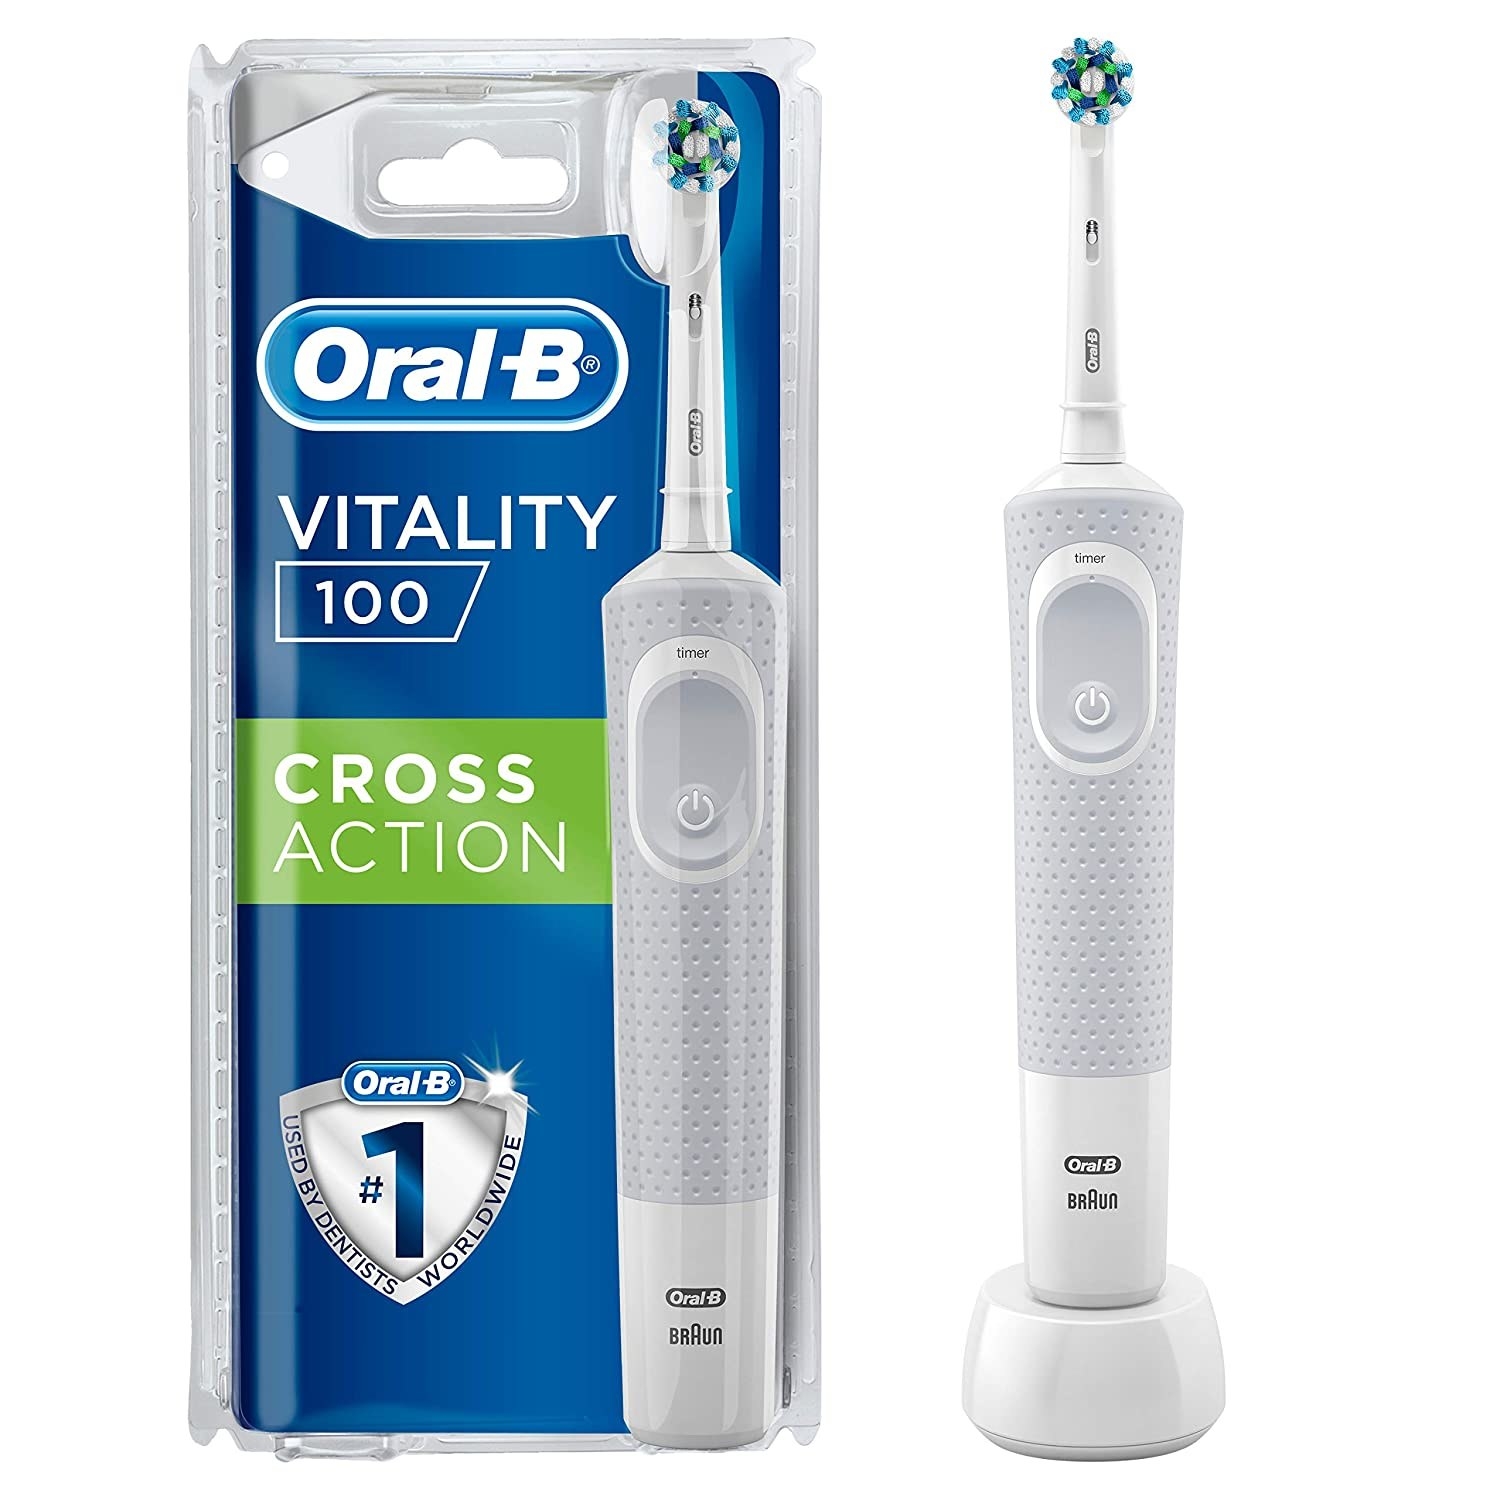 An electric toothbrush next to the box